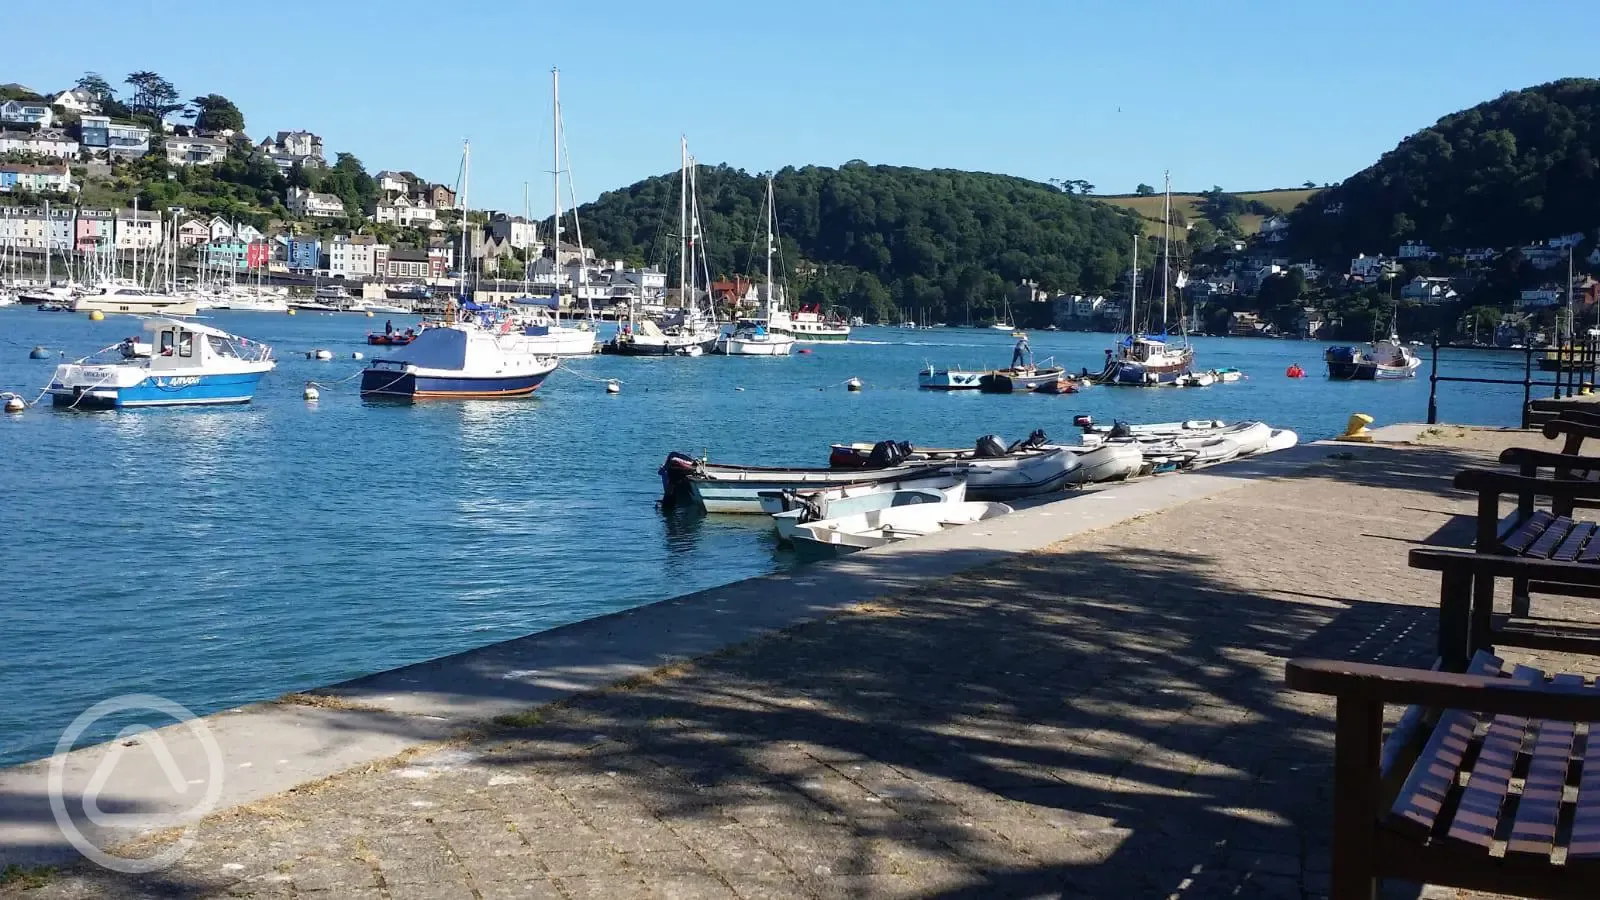 Dartmouth - Just a 30 minute drive from the Site